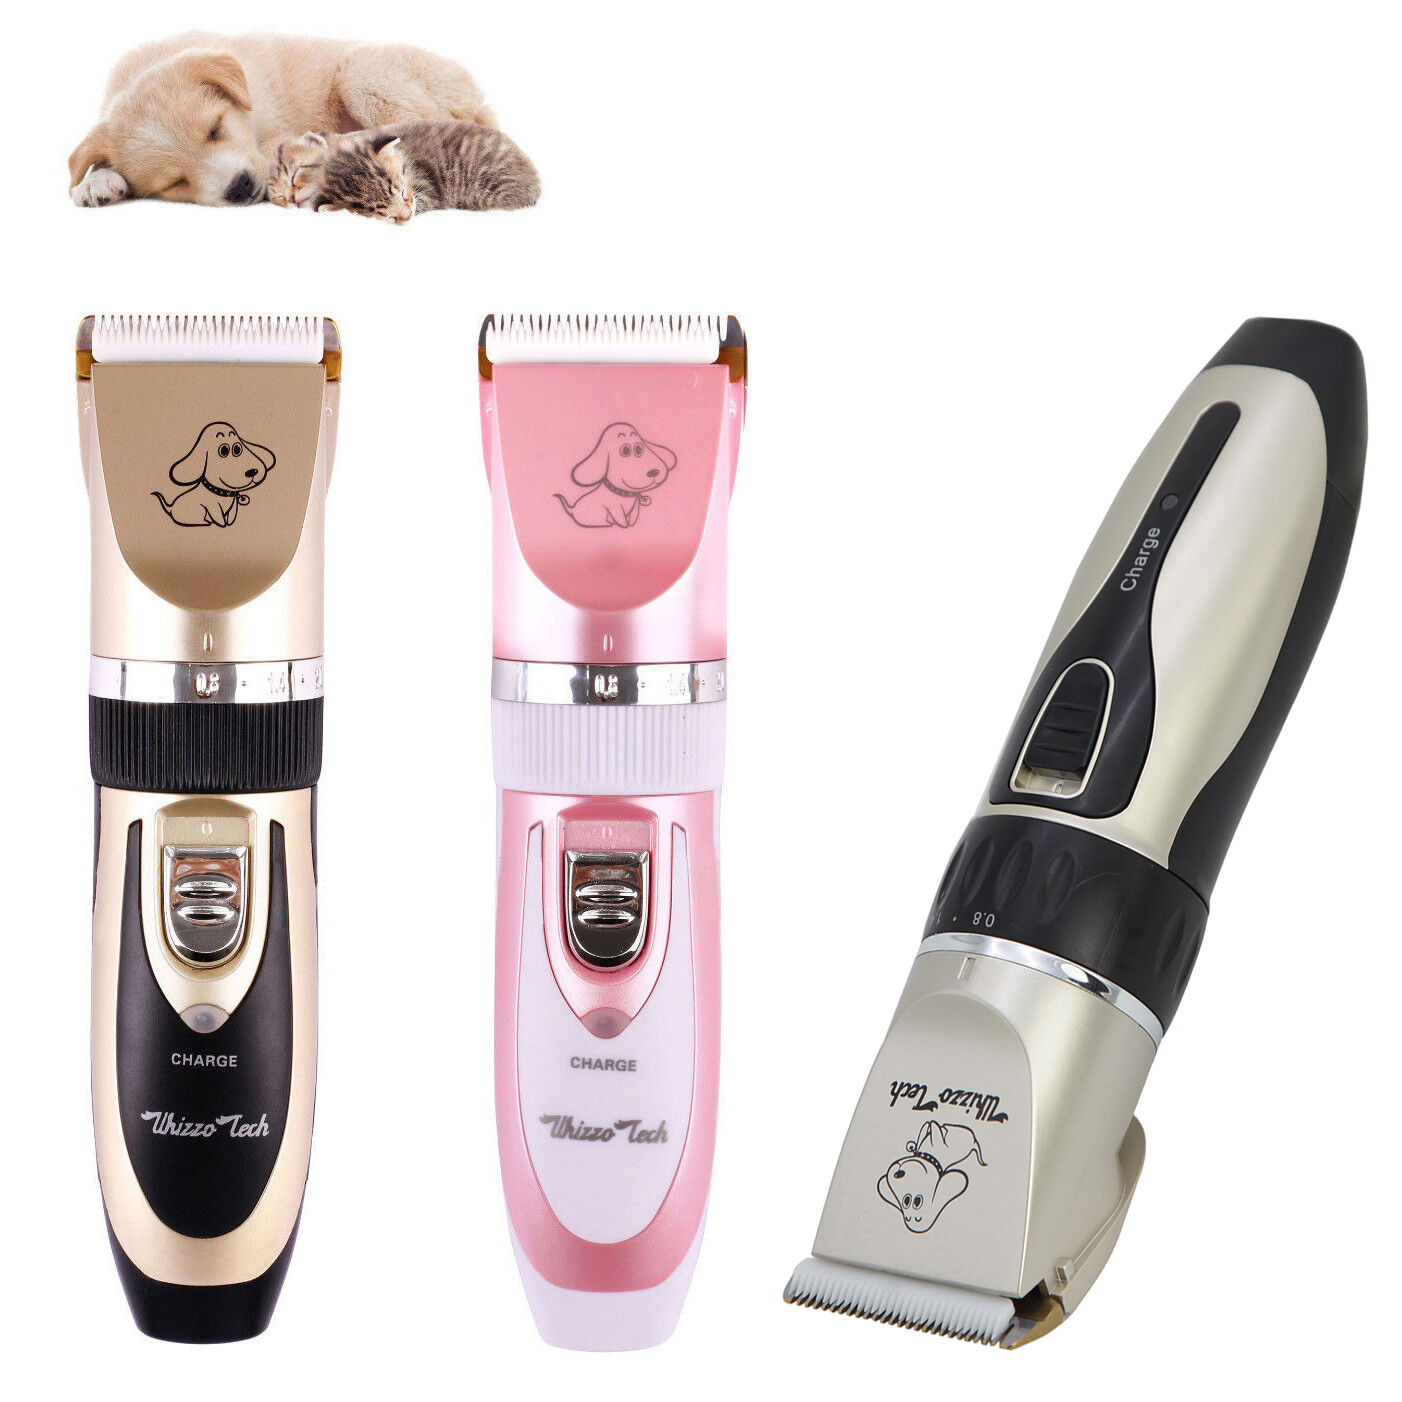 Professional Pet Dog Cat Animal Clippers Hair Grooming Cordless Trimmer Shaver WhizzoTech PT01